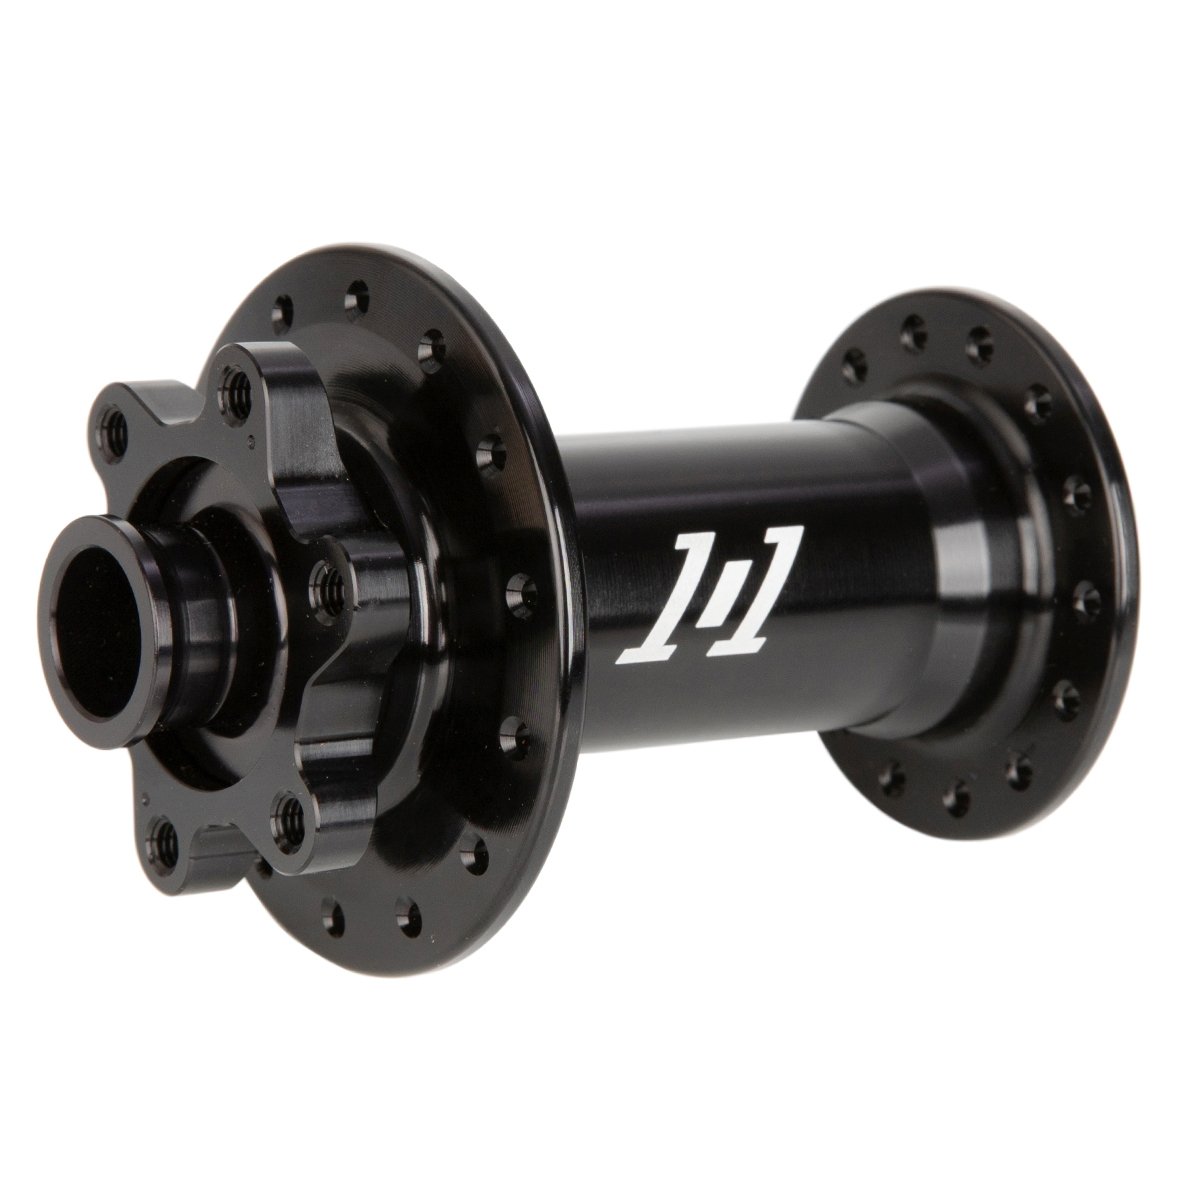 Industry Nine MTB Front Hub 1/1 Mountain Classic Boost 110x15 mm (Boost), 28 Hole, IS 6-Bolt, Black